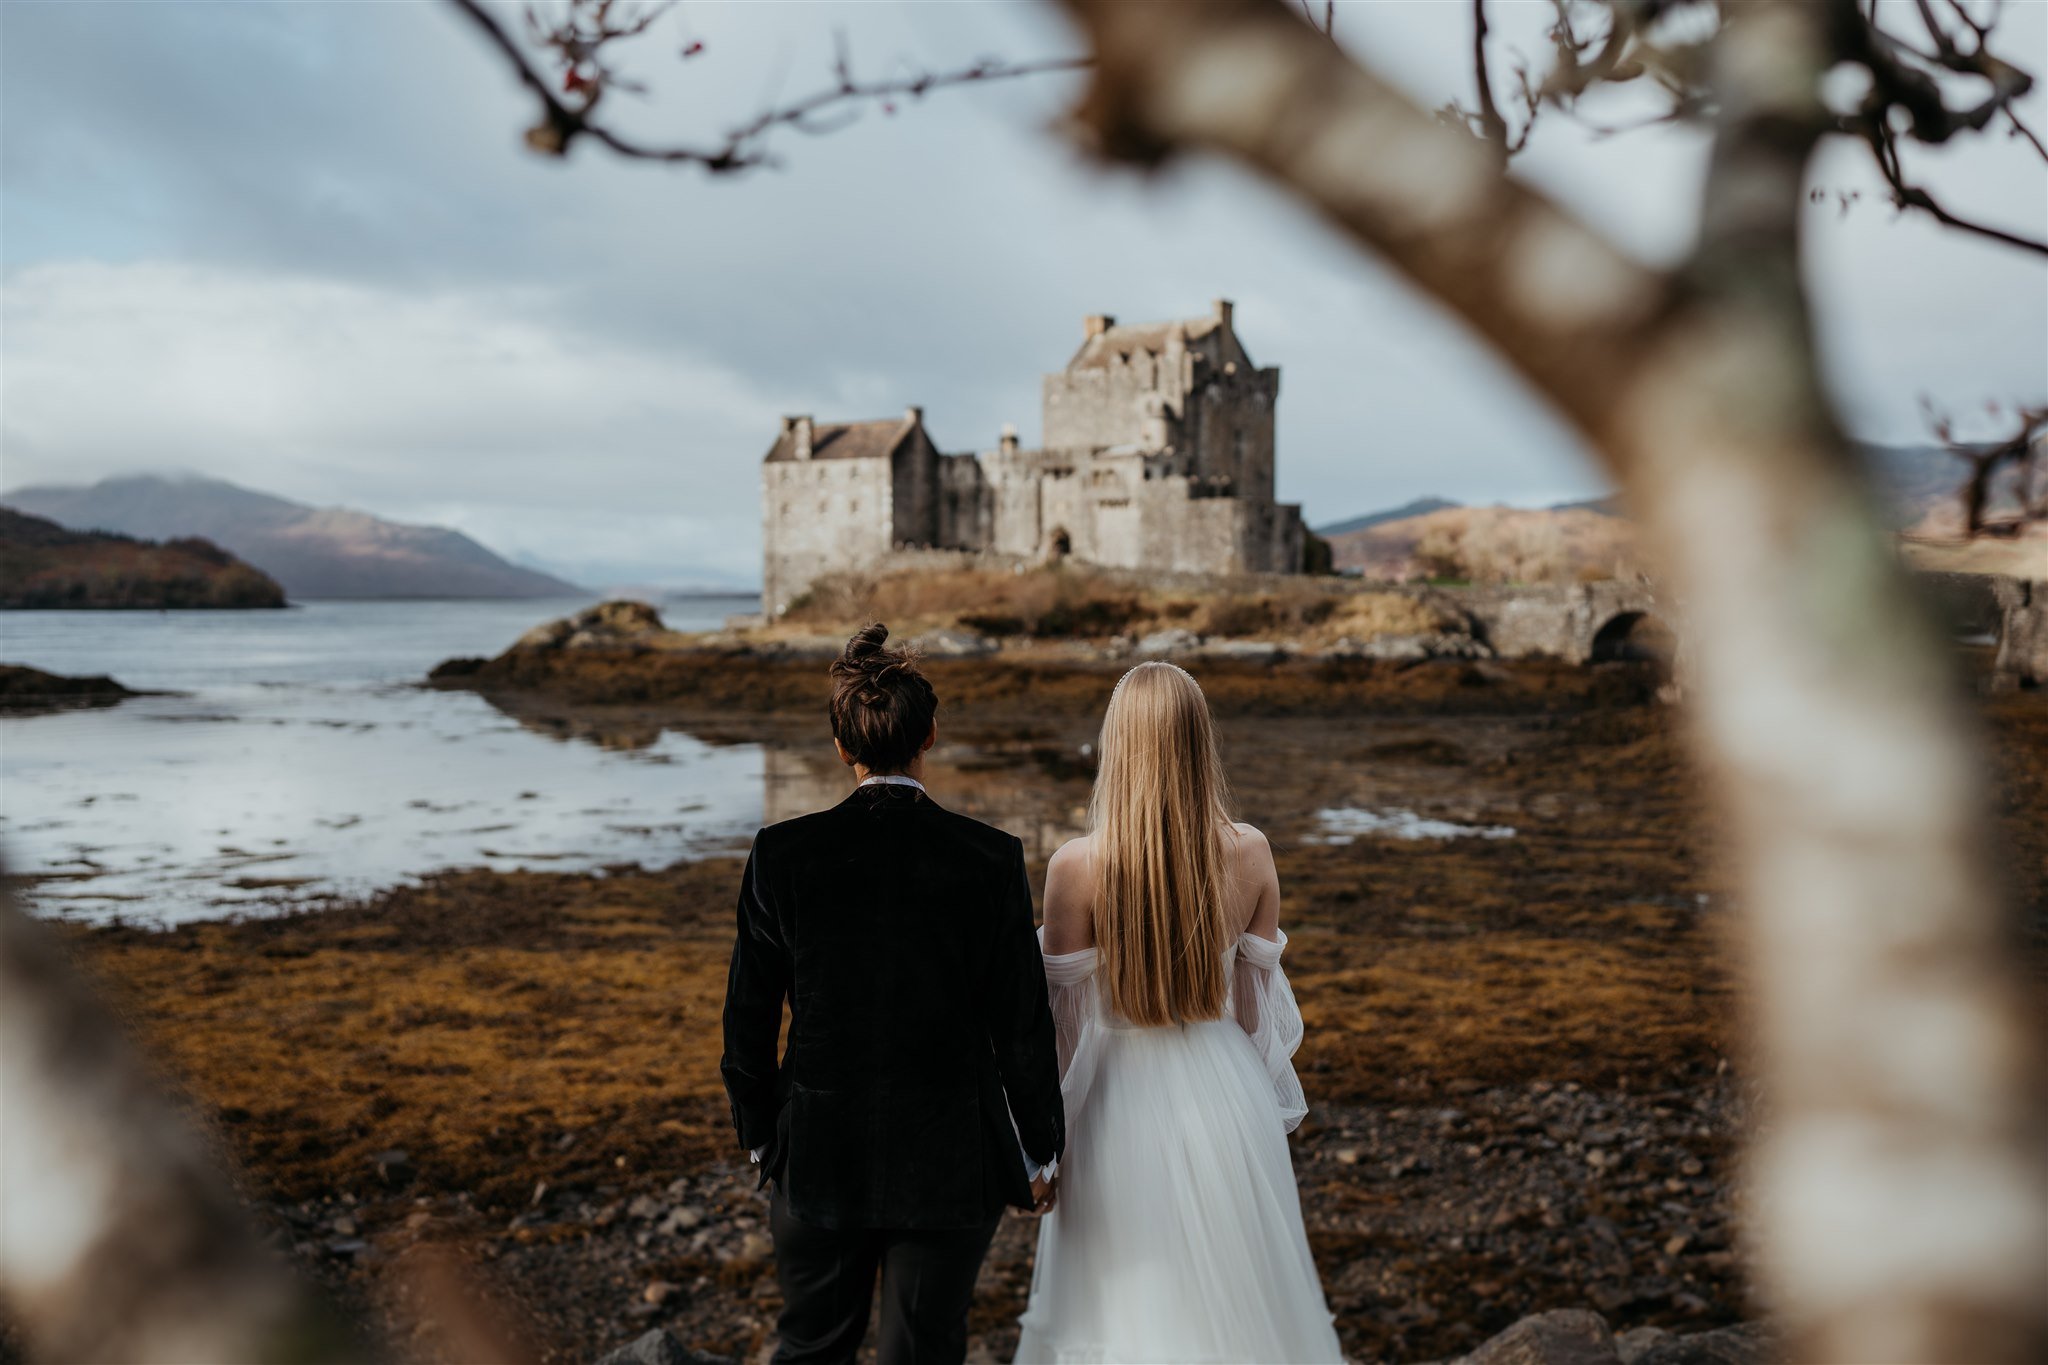 Brides hold hands while looking out at a castle on the Isle of Skye